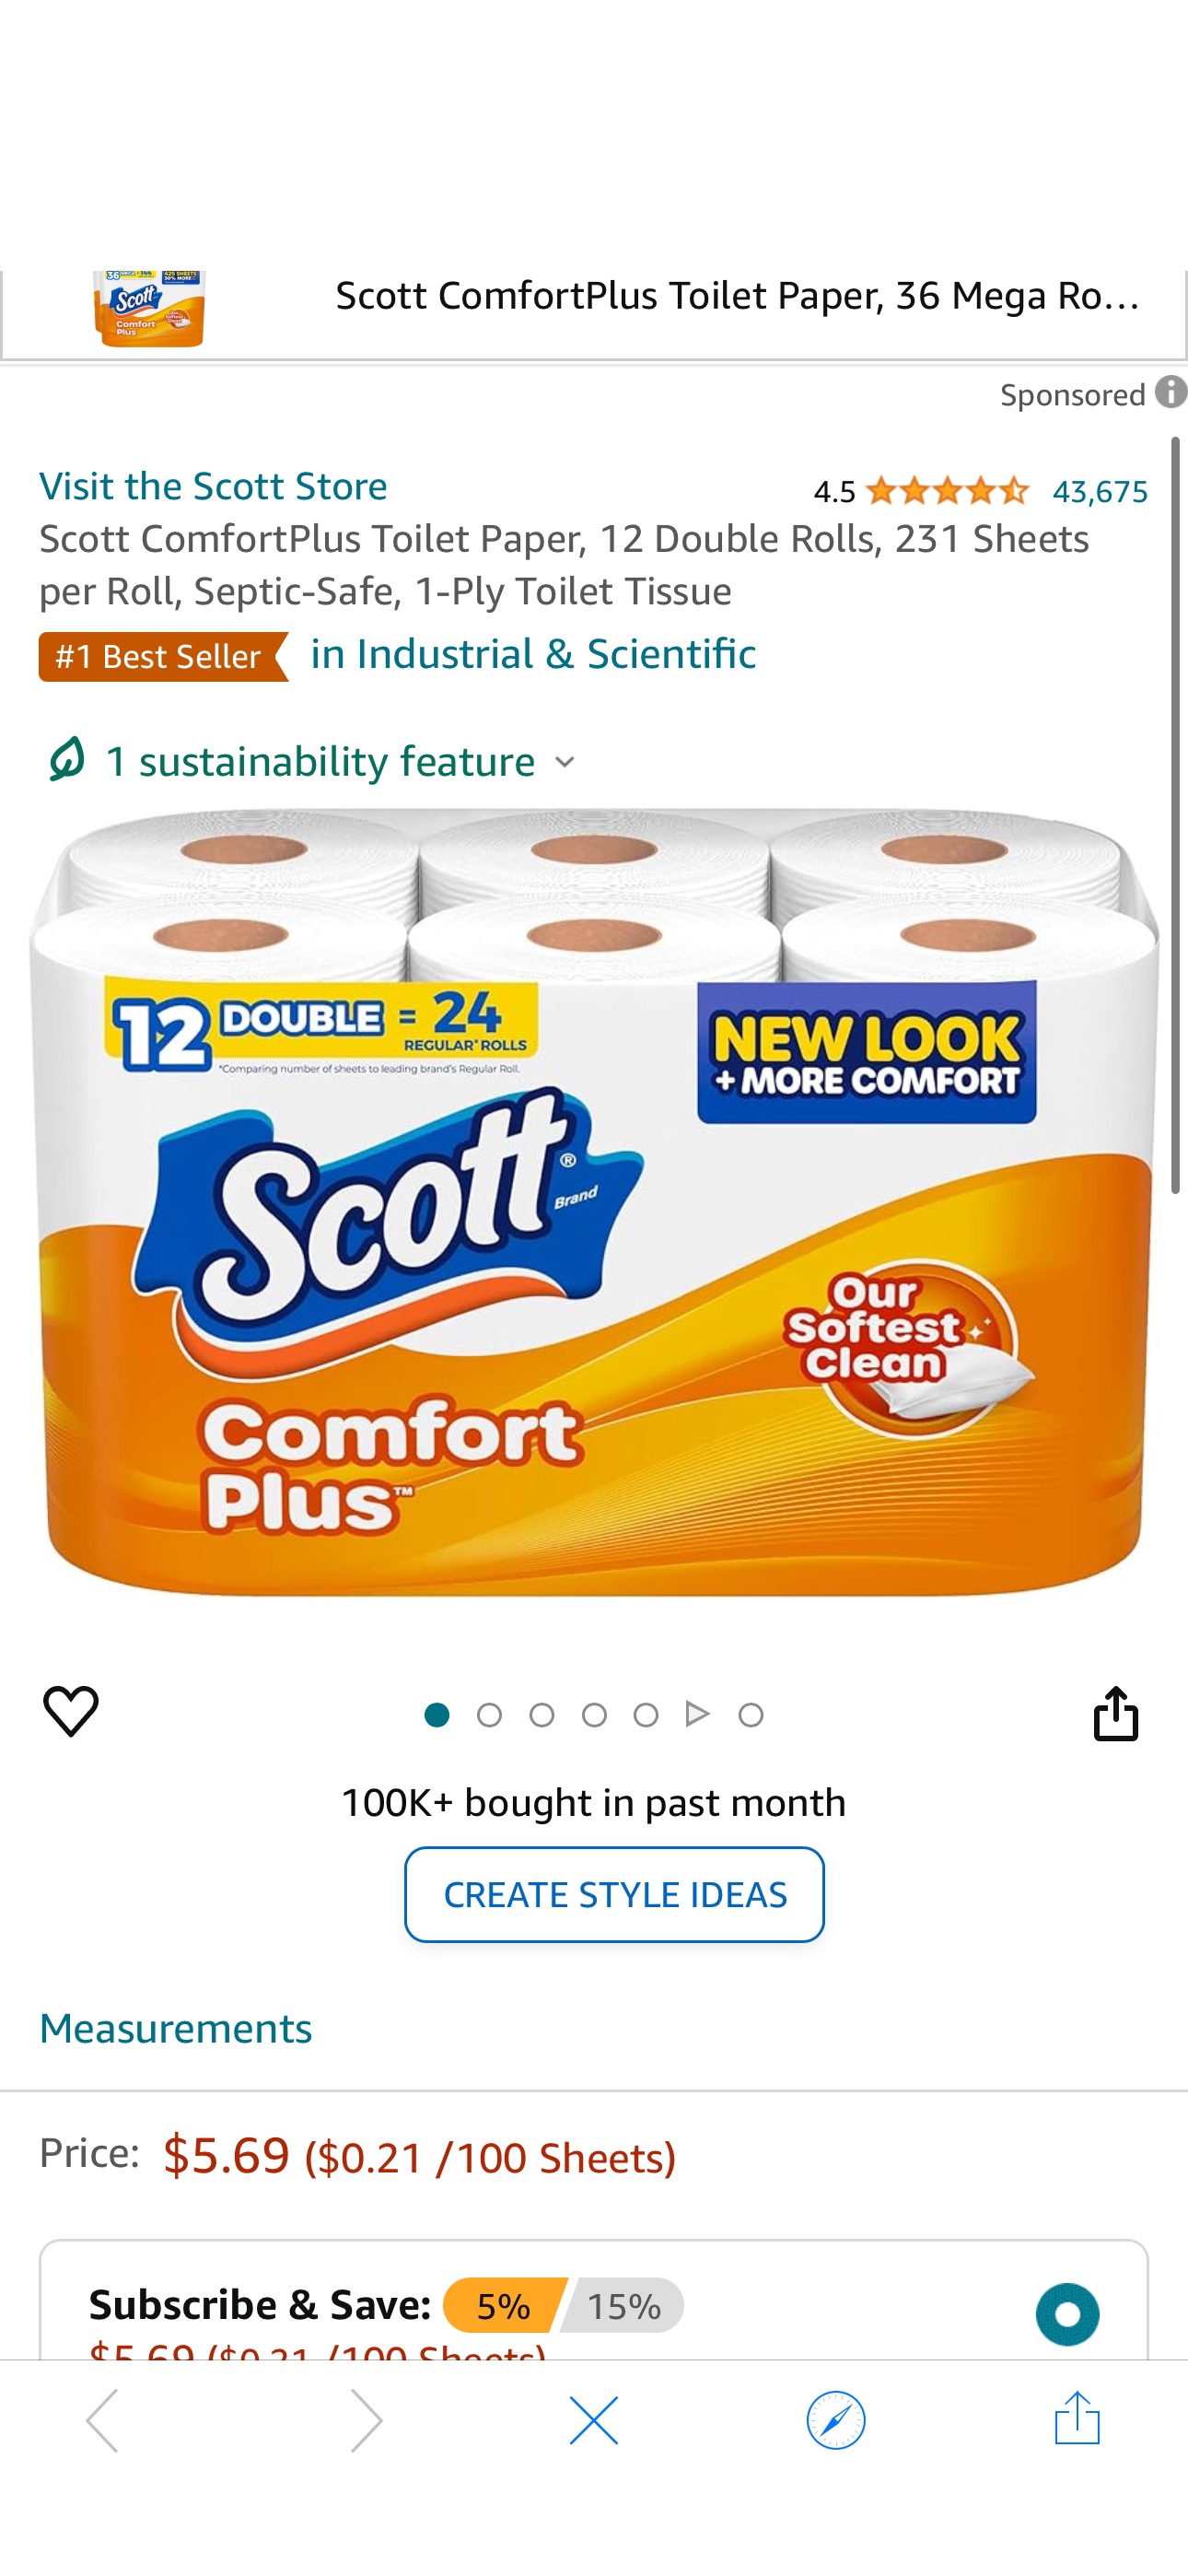 Amazon.com: Scott ComfortPlus Toilet Paper, 12 Double Rolls, 231 Sheets per Roll, Septic-Safe, 1-Ply Toilet Tissue : Health & Household